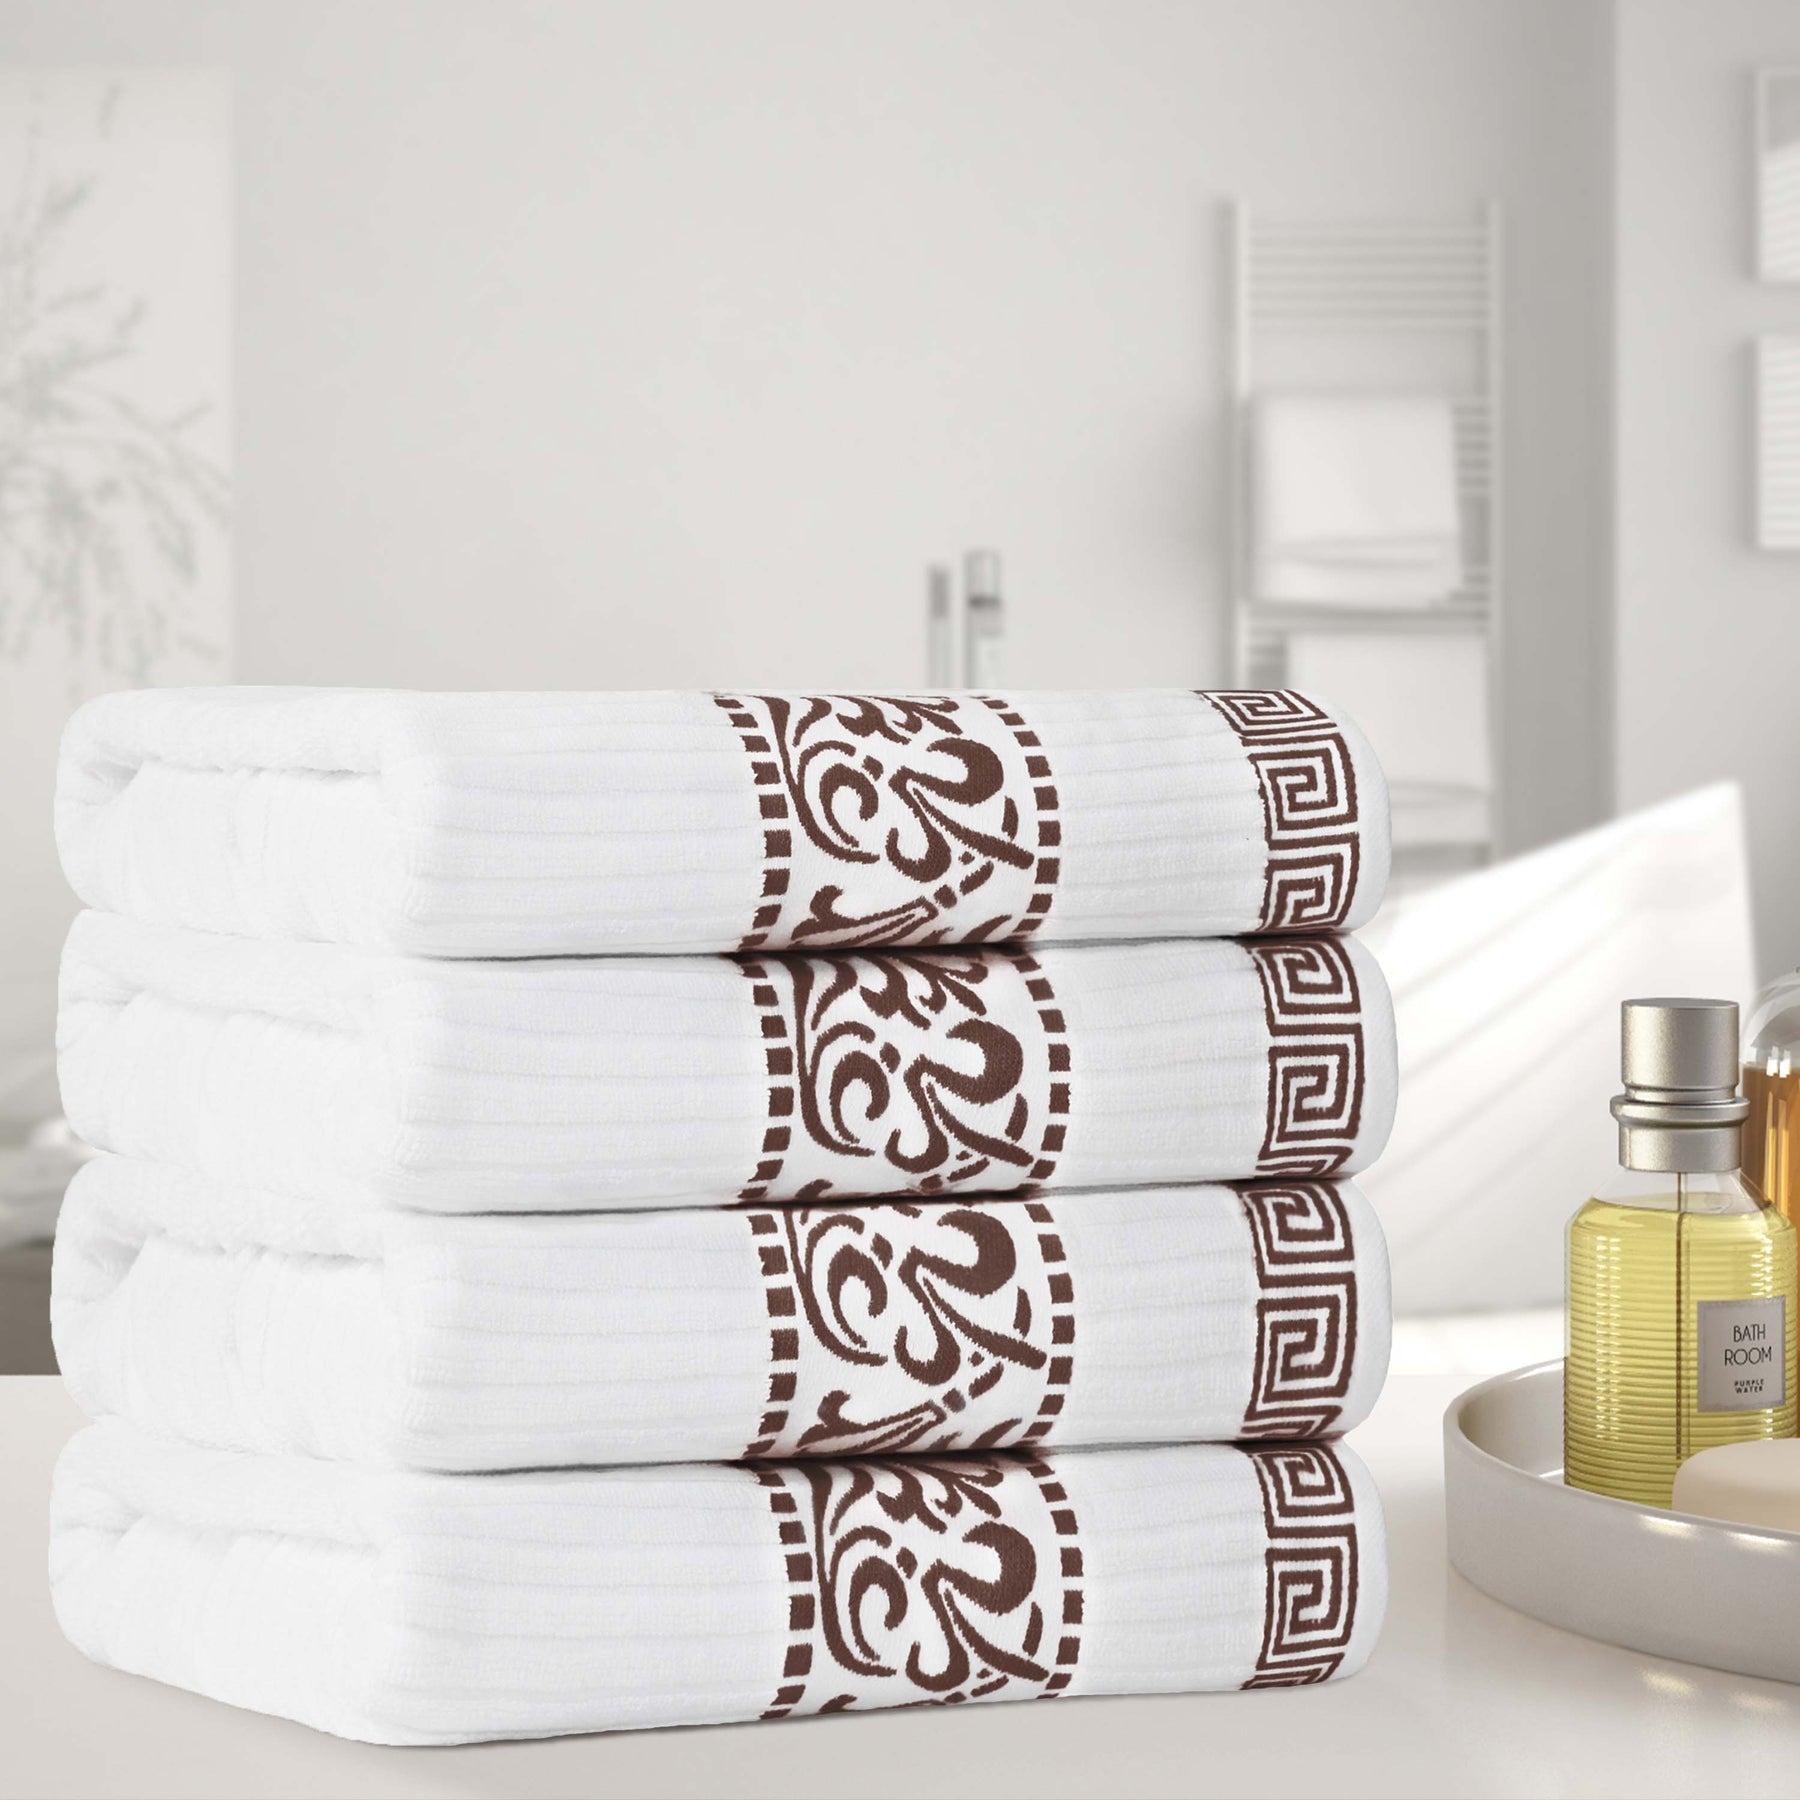 Superior Athens Cotton 4-Piece Bath Towel Set with Greek Scroll and Floral Pattern - White-Chocolate